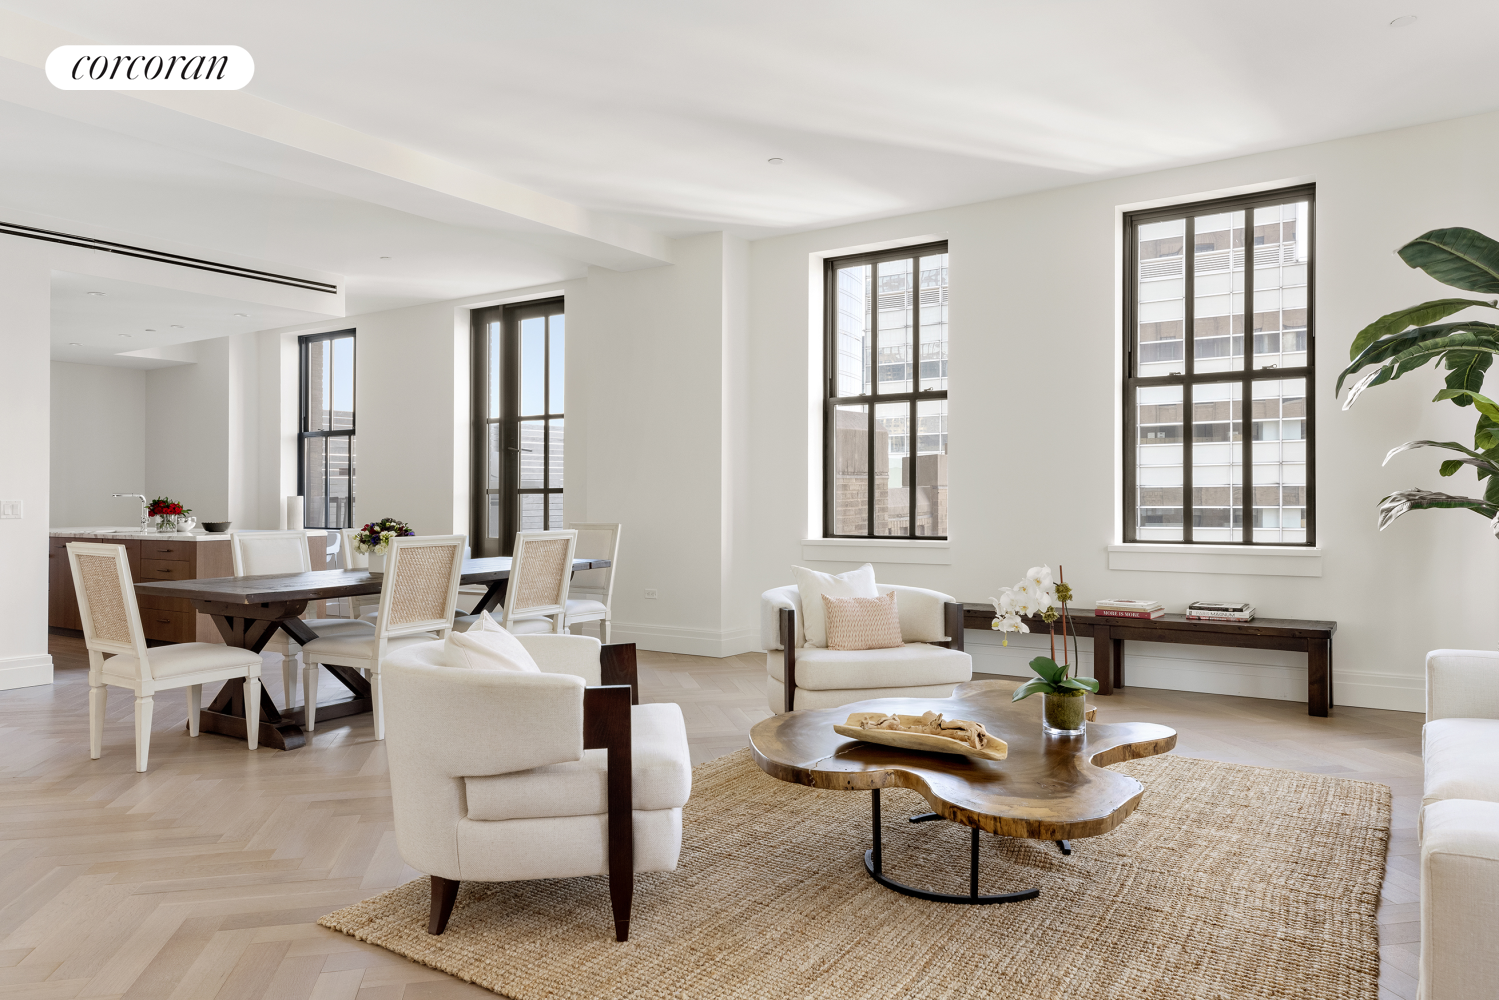 100 Barclay Street 22C, Tribeca, Downtown, NYC - 4 Bedrooms  
4 Bathrooms  
6 Rooms - 